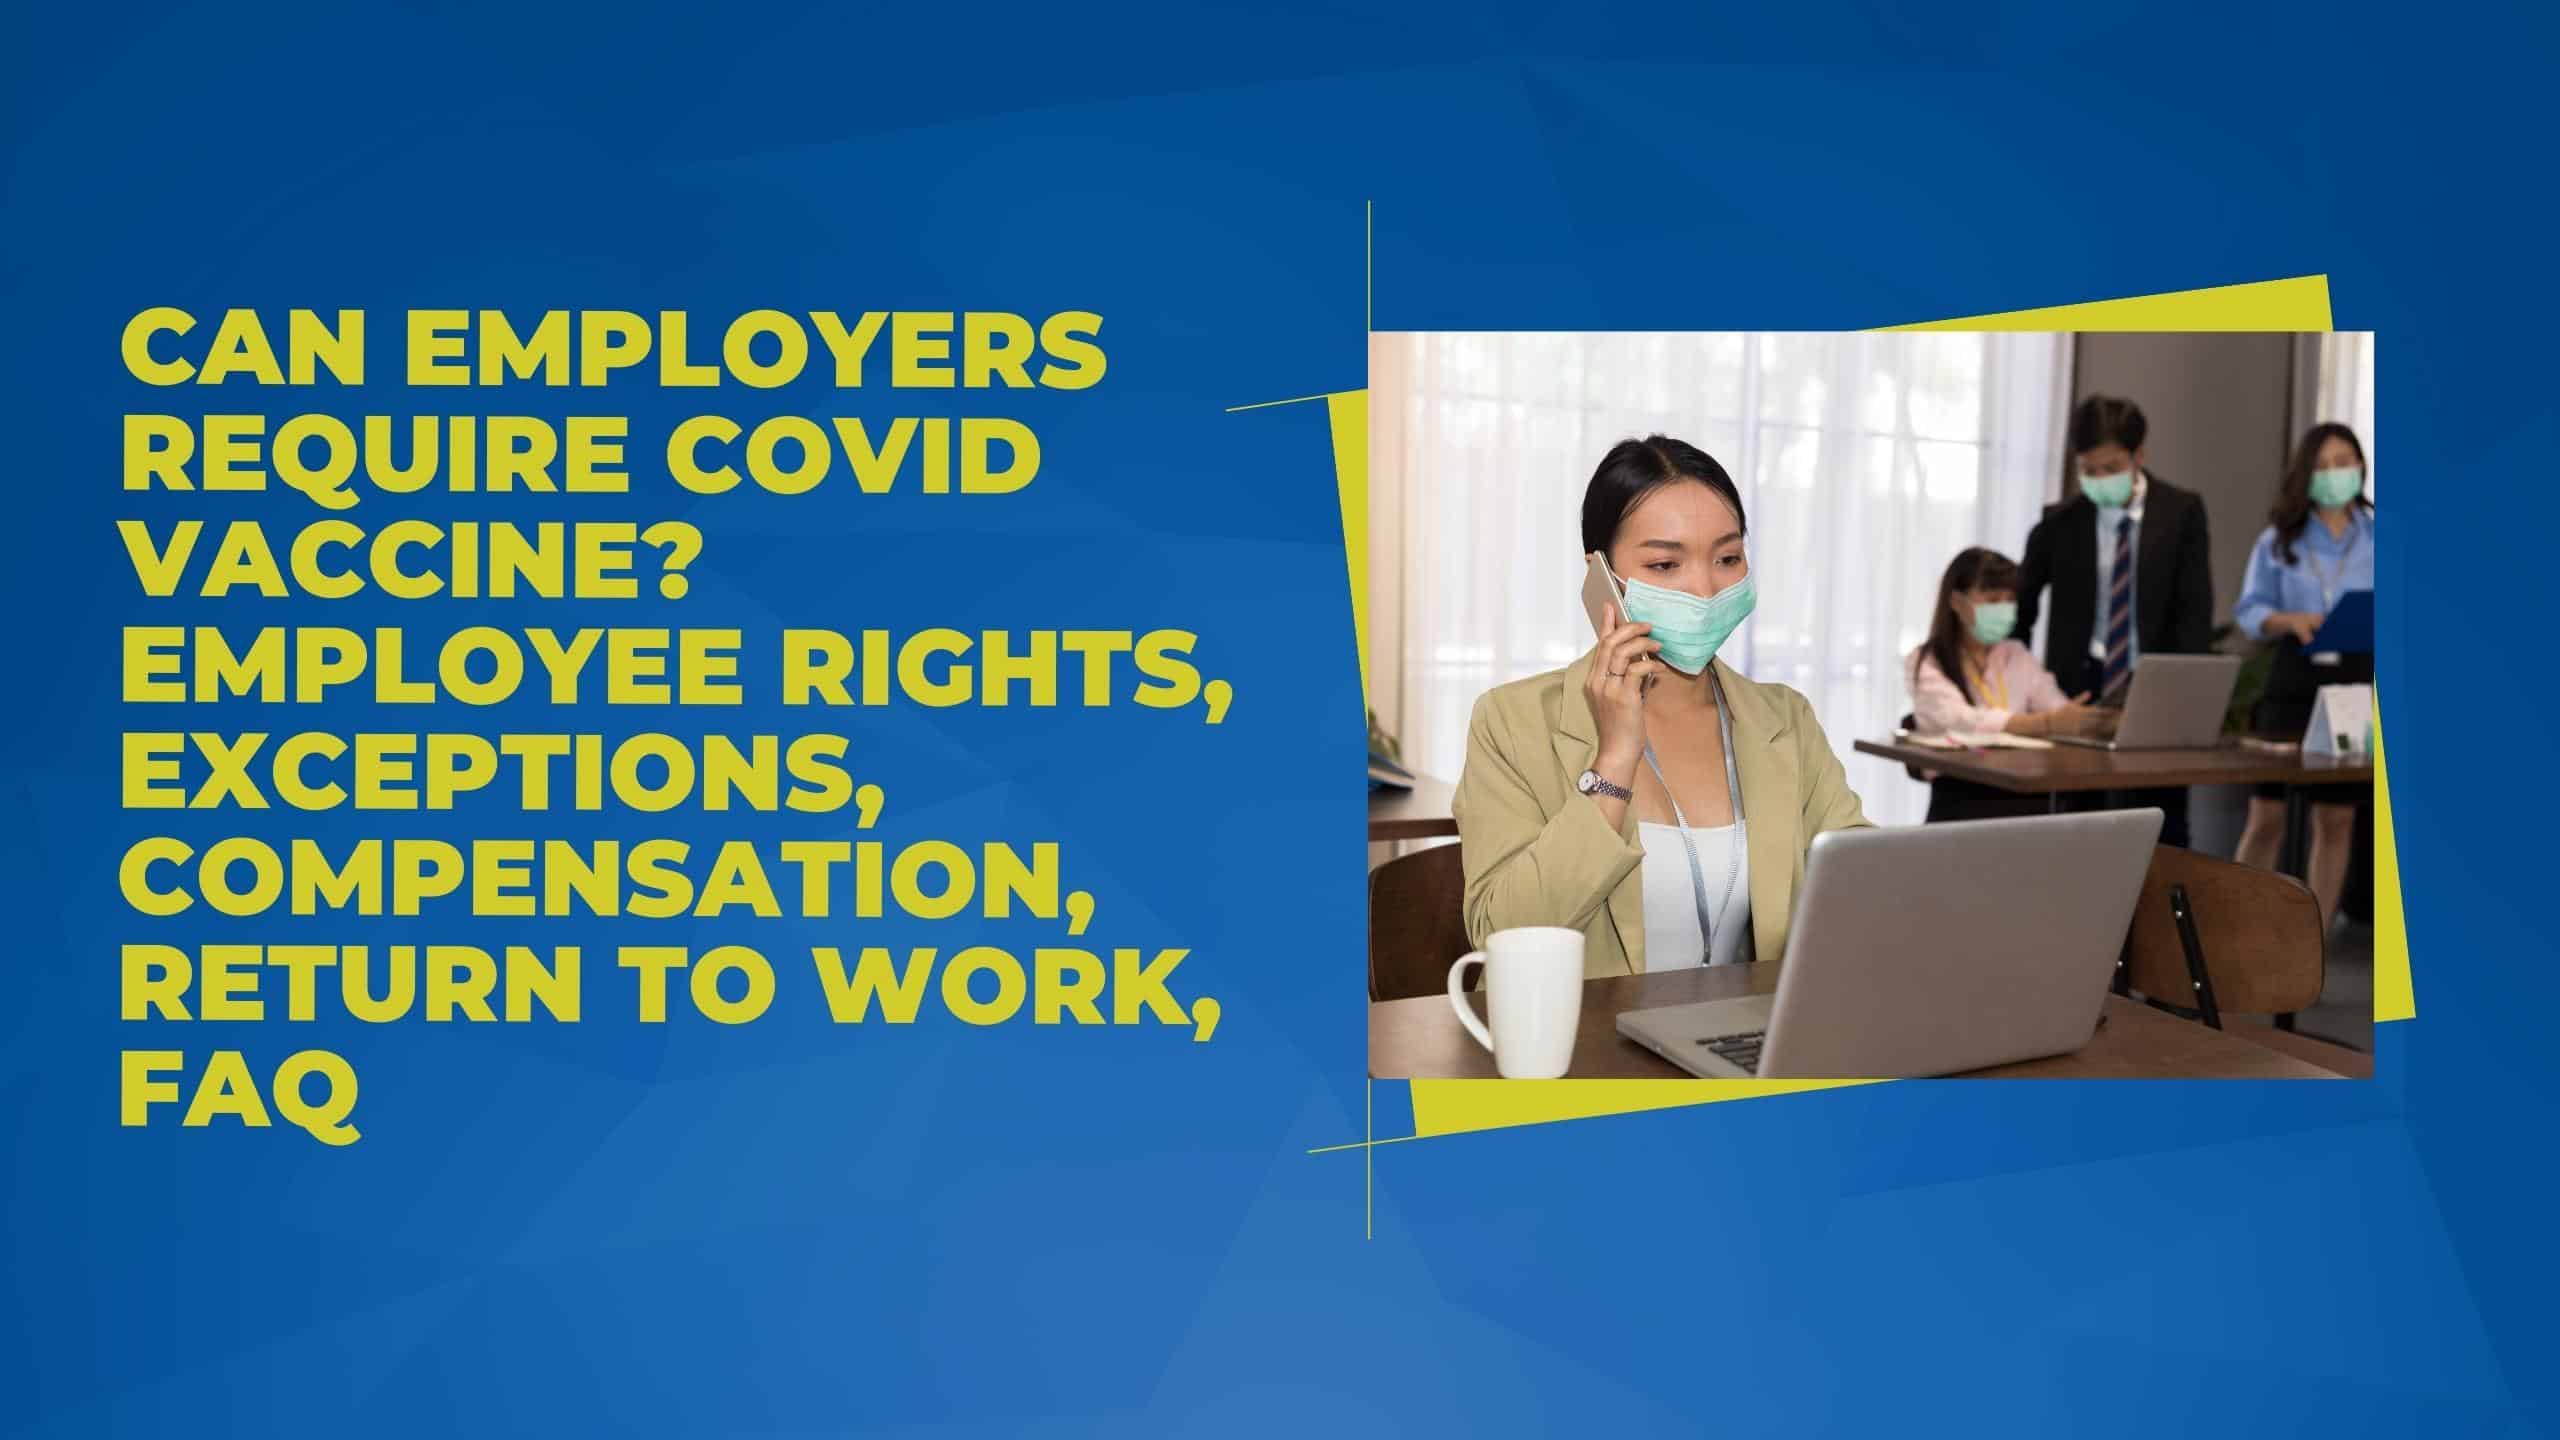 Can Employers Require Covid Vaccine? Employee Rights, Exceptions, Compensation